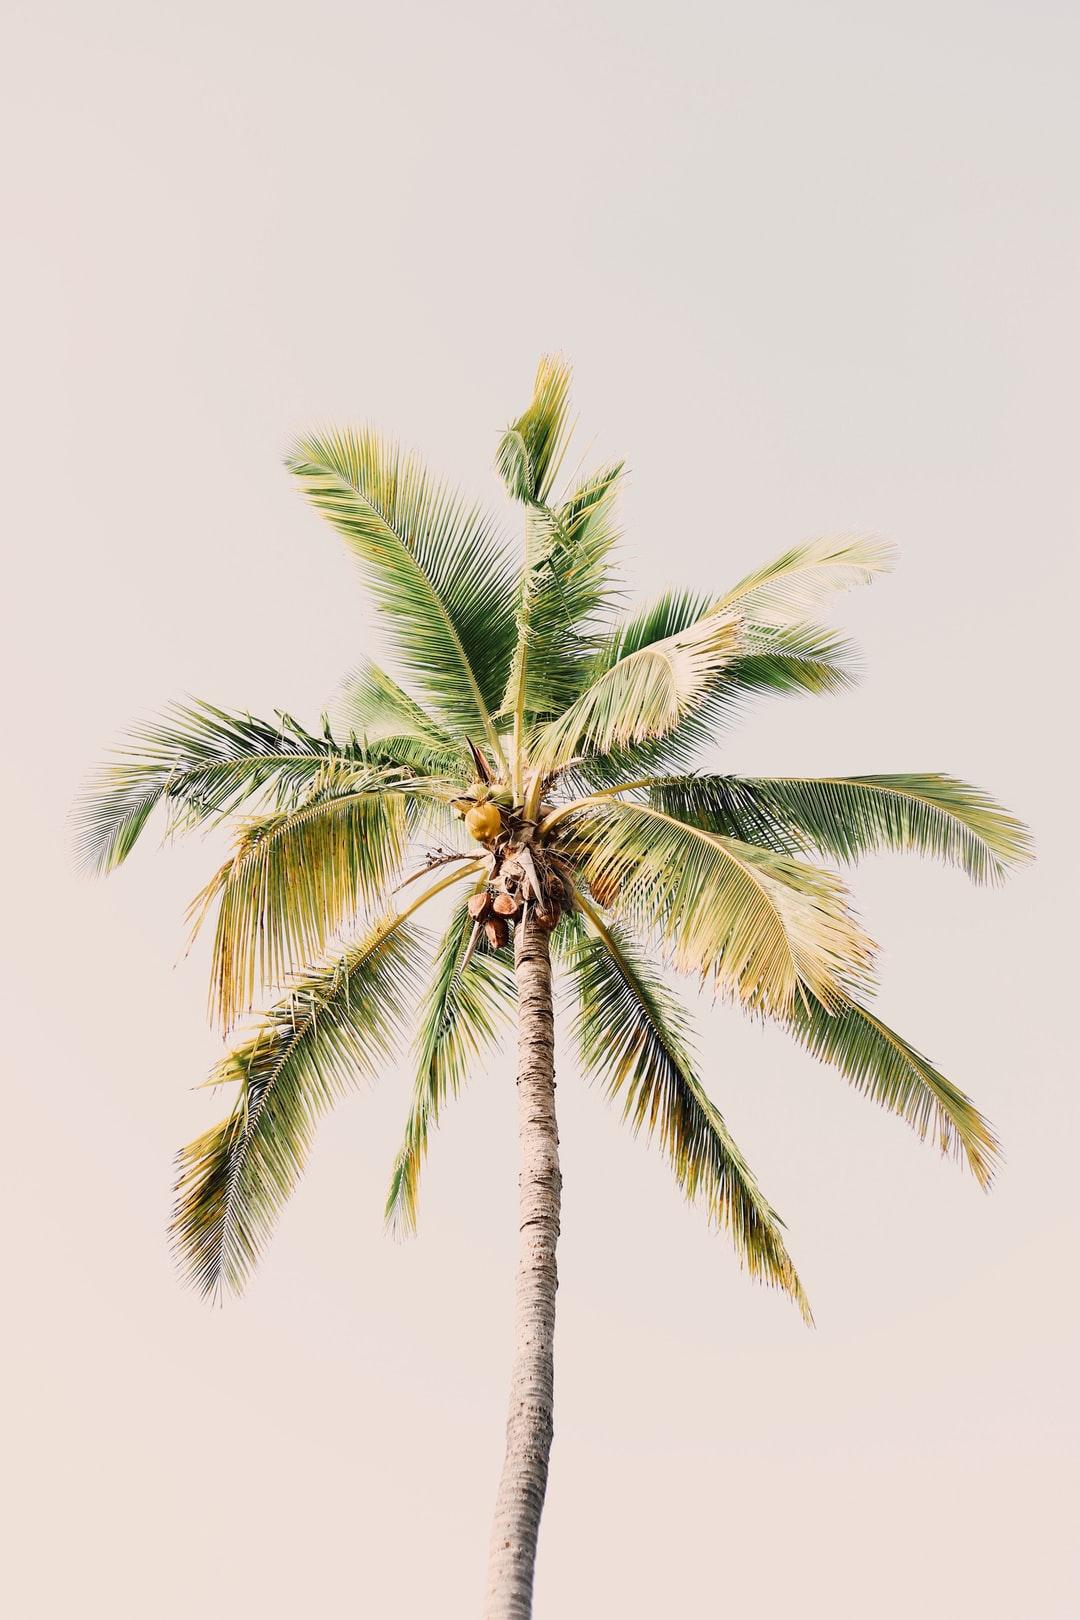 Palm Tree Image: Download HD Picture & Photo